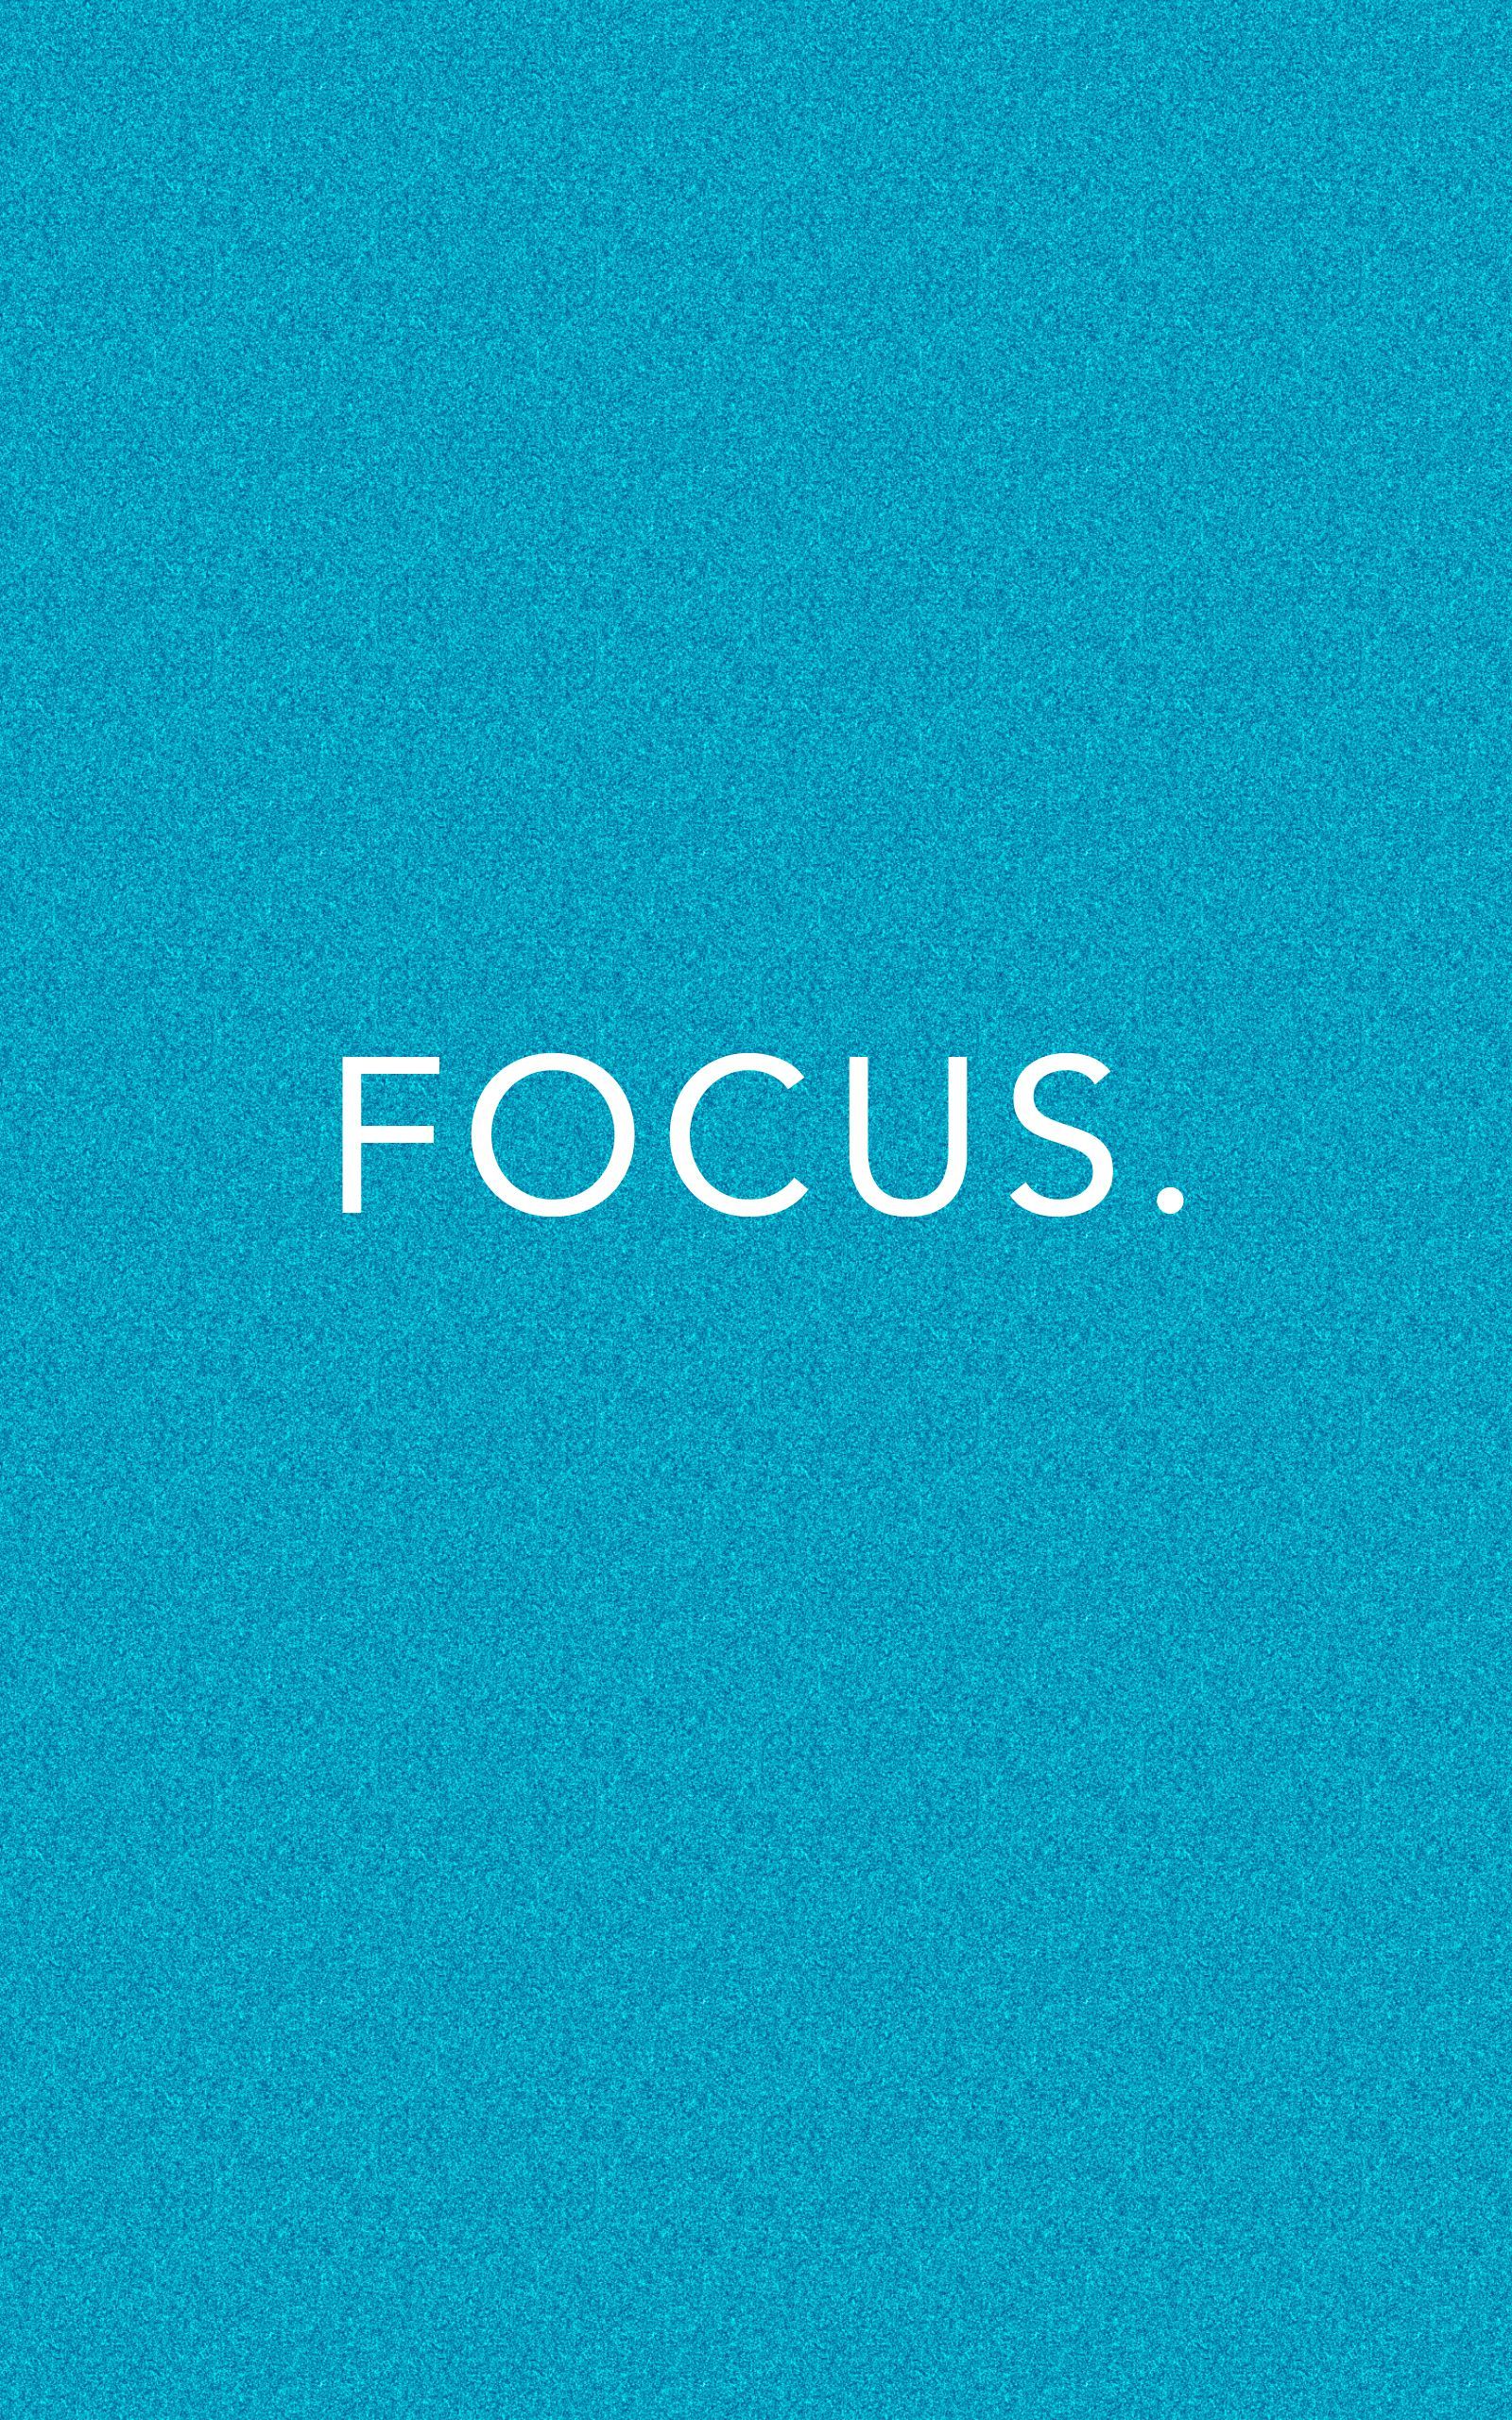 Focus Photos Download The BEST Free Focus Stock Photos  HD Images